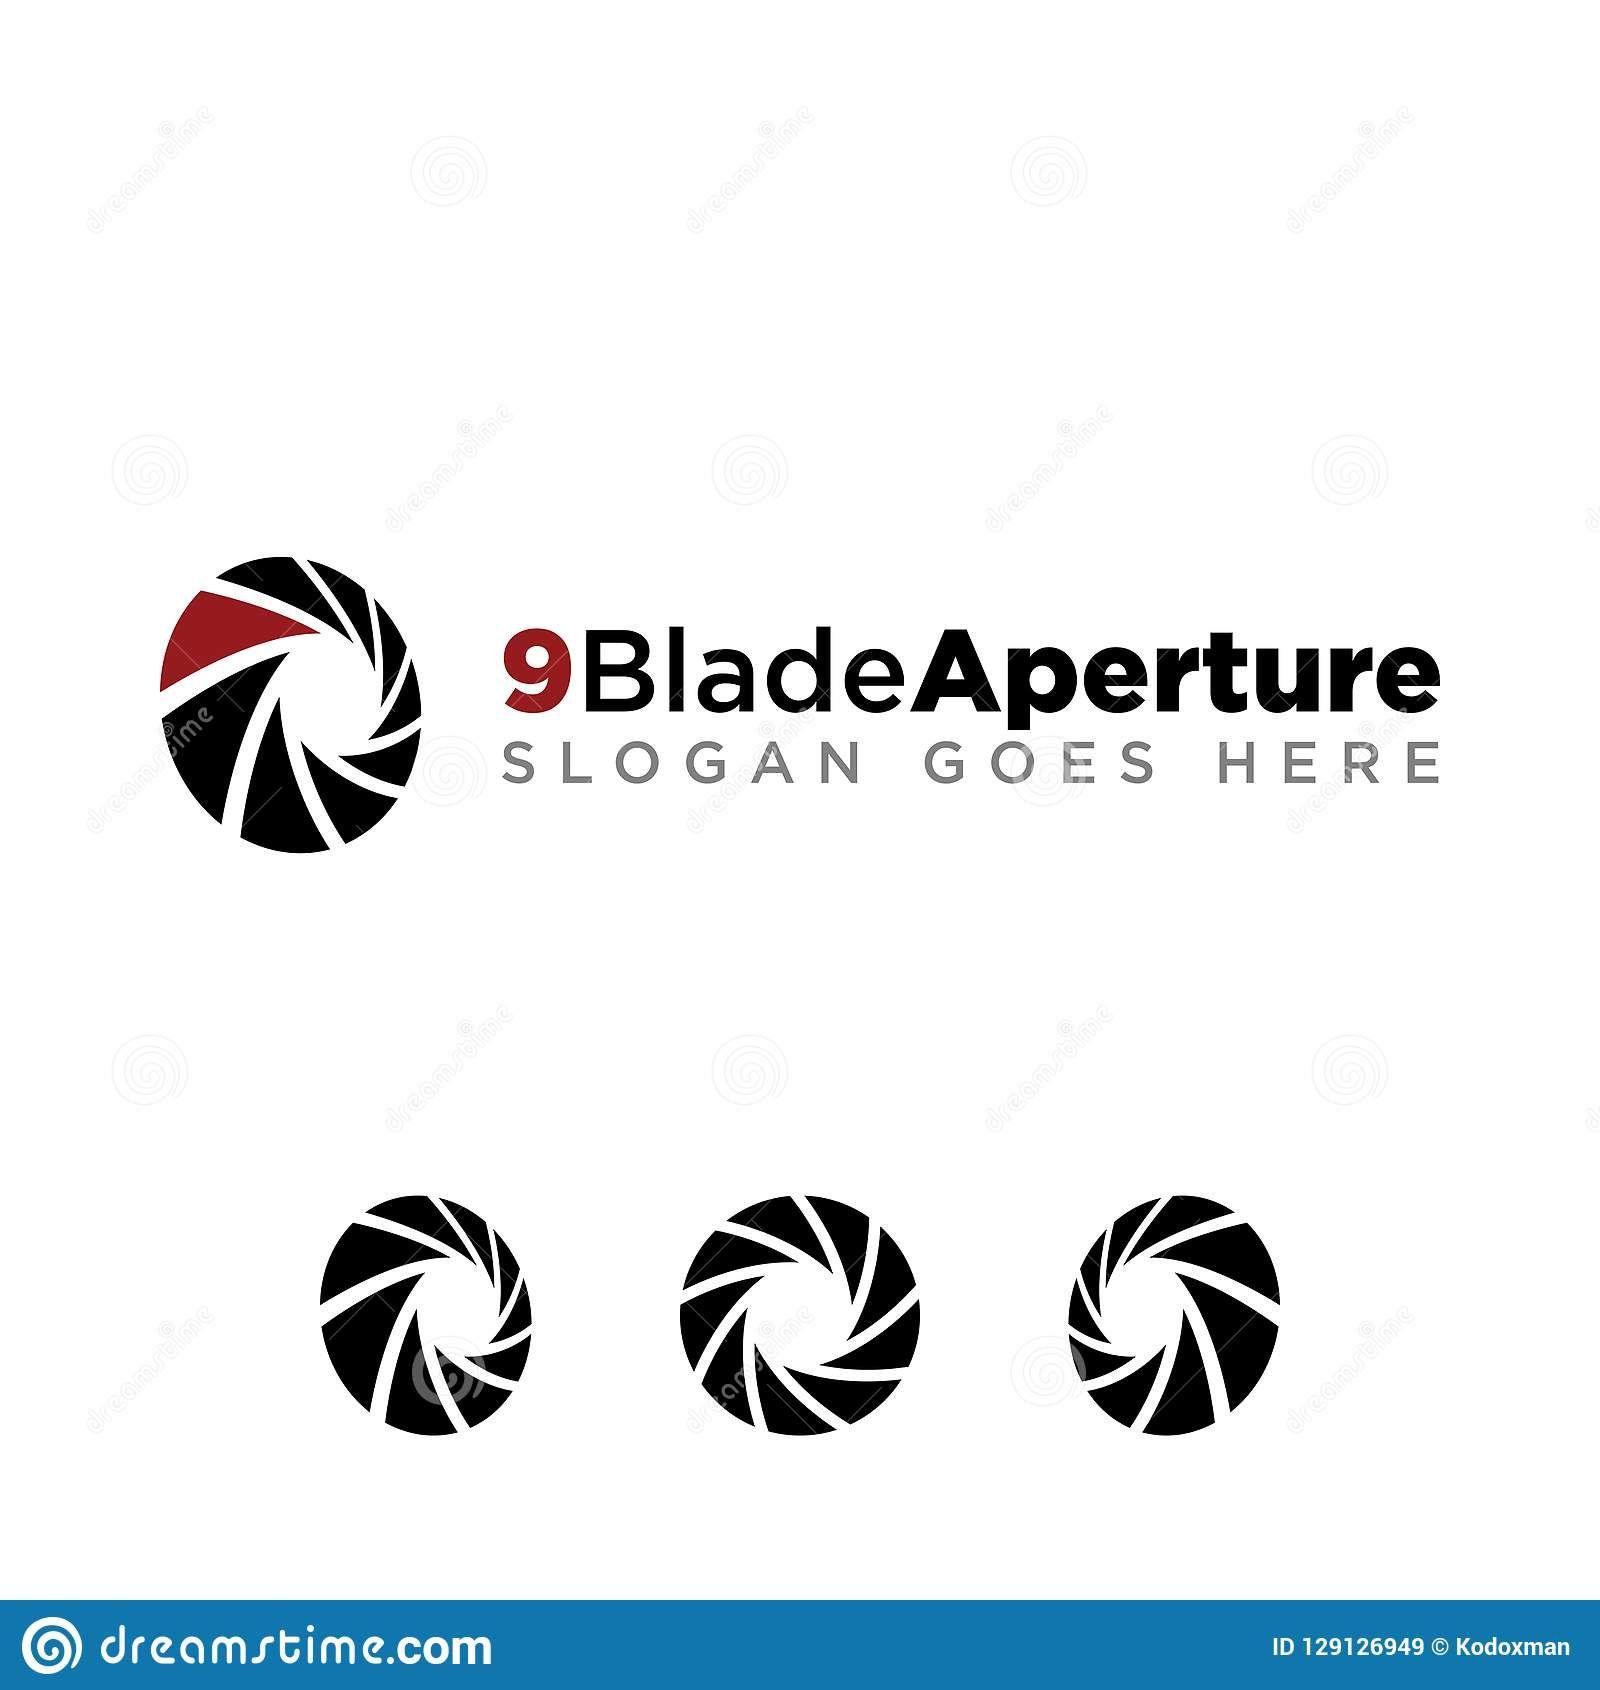 Red Blade Logo - Illustration about Aperture blade for photography company logo set ...